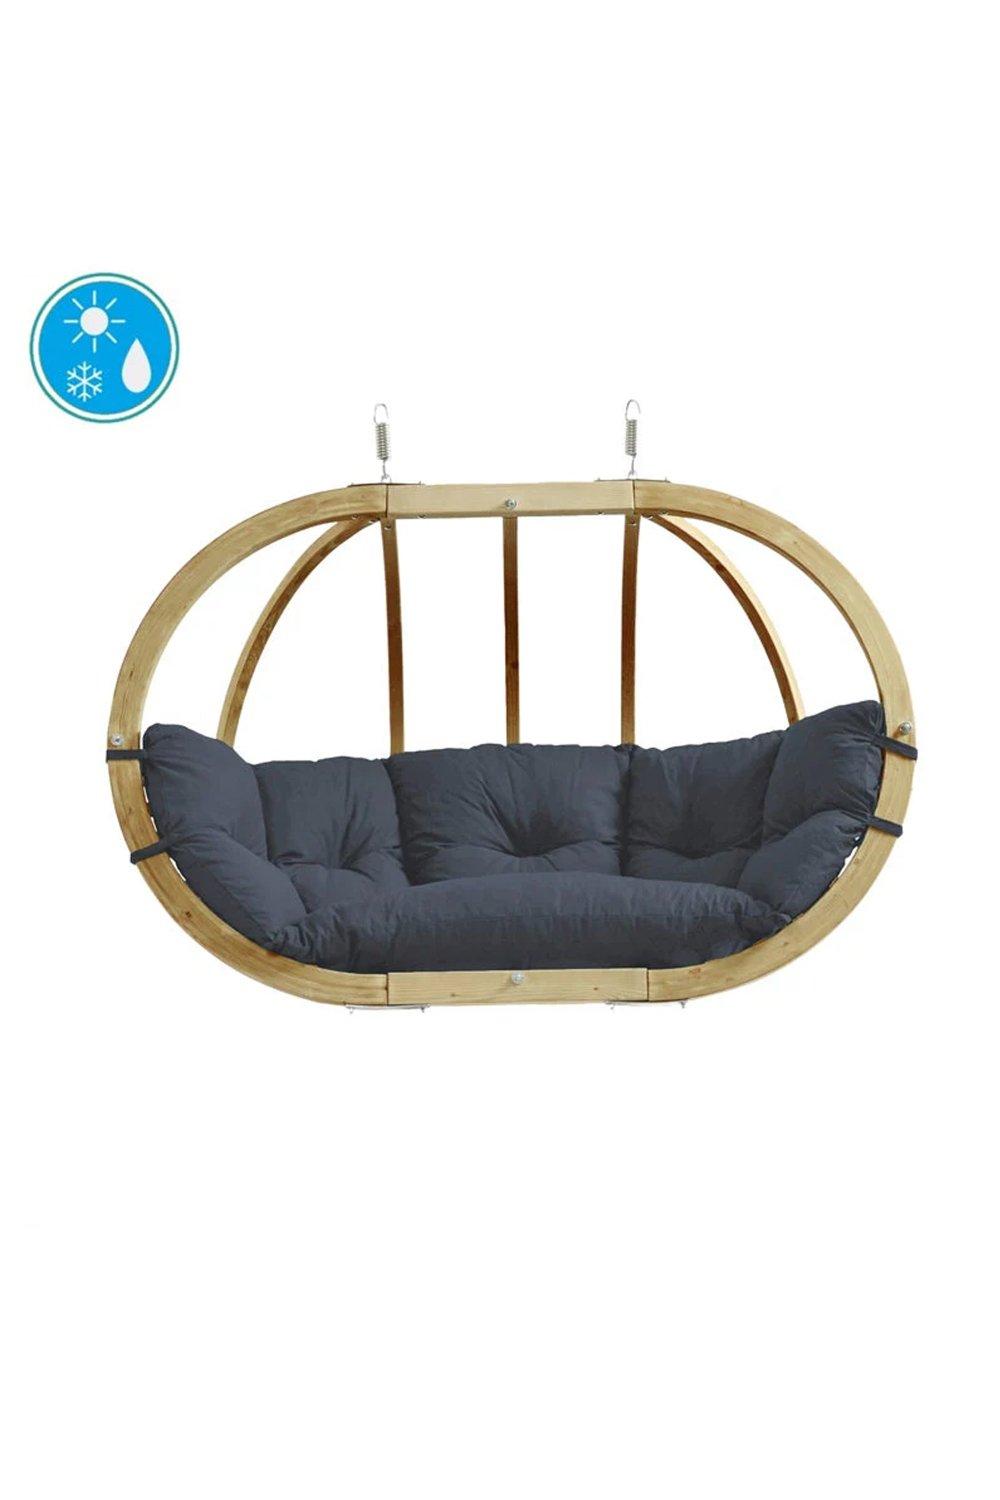 Globo Double Royal Wooden Cushion Egg Hanging Chair - Anthracite